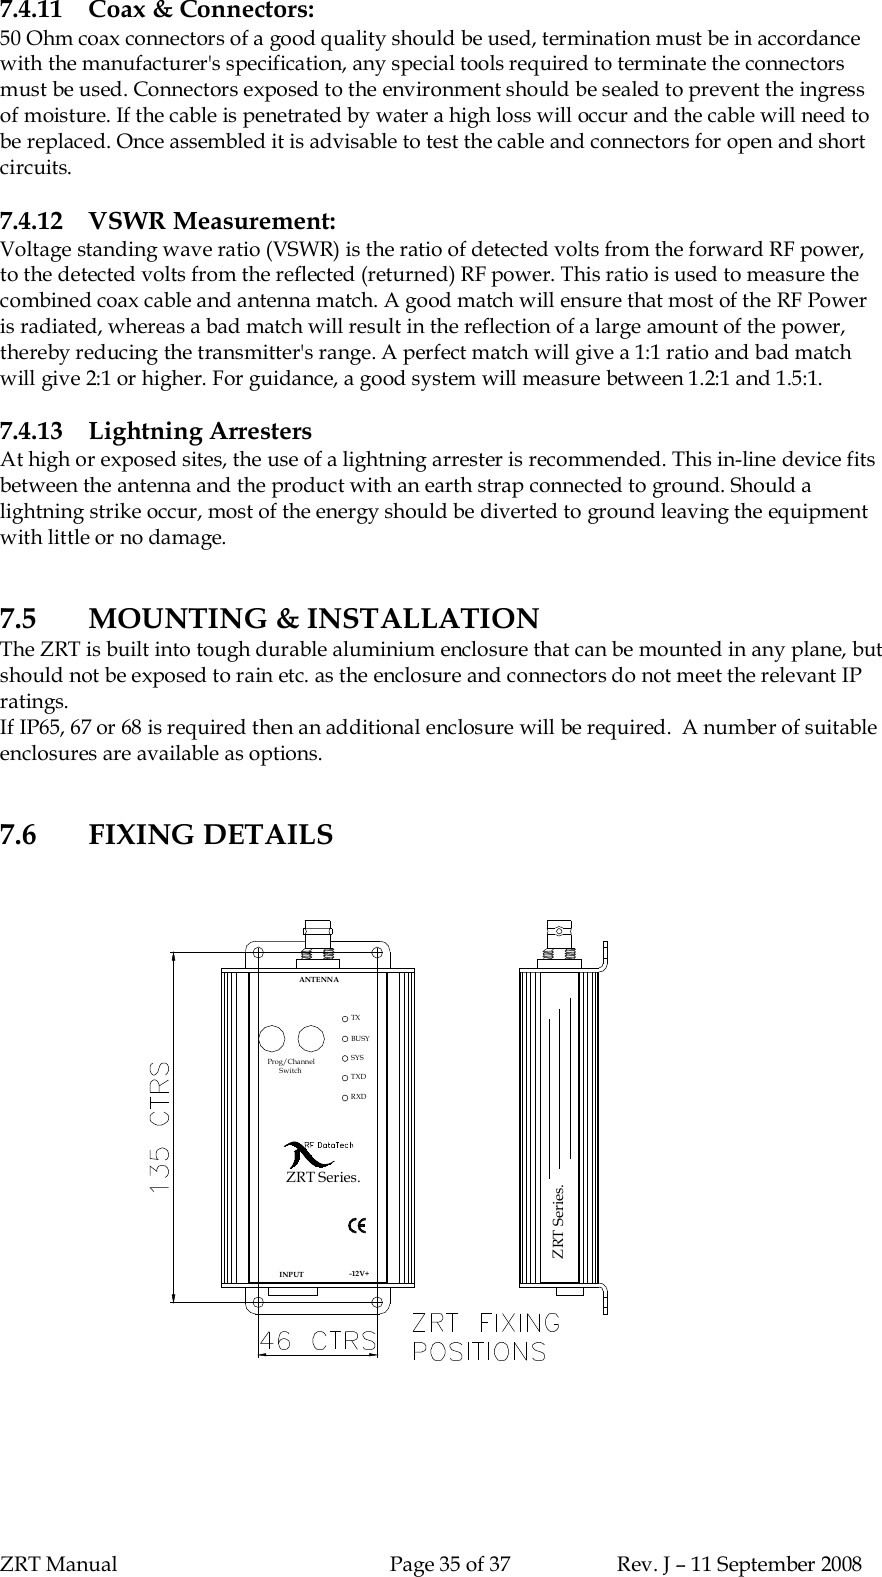 ZRT Manual Page 35 of 37 Rev. J – 11 September 20087.4.11 Coax &amp; Connectors:50 Ohm coax connectors of a good quality should be used, termination must be in accordancewith the manufacturer&apos;s specification, any special tools required to terminate the connectorsmust be used. Connectors exposed to the environment should be sealed to prevent the ingressof moisture. If the cable is penetrated by water a high loss will occur and the cable will need tobe replaced. Once assembled it is advisable to test the cable and connectors for open and shortcircuits.7.4.12 VSWR Measurement:Voltage standing wave ratio (VSWR) is the ratio of detected volts from the forward RF power,to the detected volts from the reflected (returned) RF power. This ratio is used to measure thecombined coax cable and antenna match. A good match will ensure that most of the RF Poweris radiated, whereas a bad match will result in the reflection of a large amount of the power,thereby reducing the transmitter&apos;s range. A perfect match will give a 1:1 ratio and bad matchwill give 2:1 or higher. For guidance, a good system will measure between 1.2:1 and 1.5:1.7.4.13 Lightning ArrestersAt high or exposed sites, the use of a lightning arrester is recommended. This in-line device fitsbetween the antenna and the product with an earth strap connected to ground. Should alightning strike occur, most of the energy should be diverted to ground leaving the equipmentwith little or no damage.7.5 MOUNTING &amp; INSTALLATIONThe ZRT is built into tough durable aluminium enclosure that can be mounted in any plane, butshould not be exposed to rain etc. as the enclosure and connectors do not meet the relevant IPratings.If IP65, 67 or 68 is required then an additional enclosure will be required.  A number of suitableenclosures are available as options.7.6 FIXING DETAILSZRT Series.ANTENNABU SYSYSTXProg/ChannelSwi tchZRT Series.TXDRXDINP UT -12V+